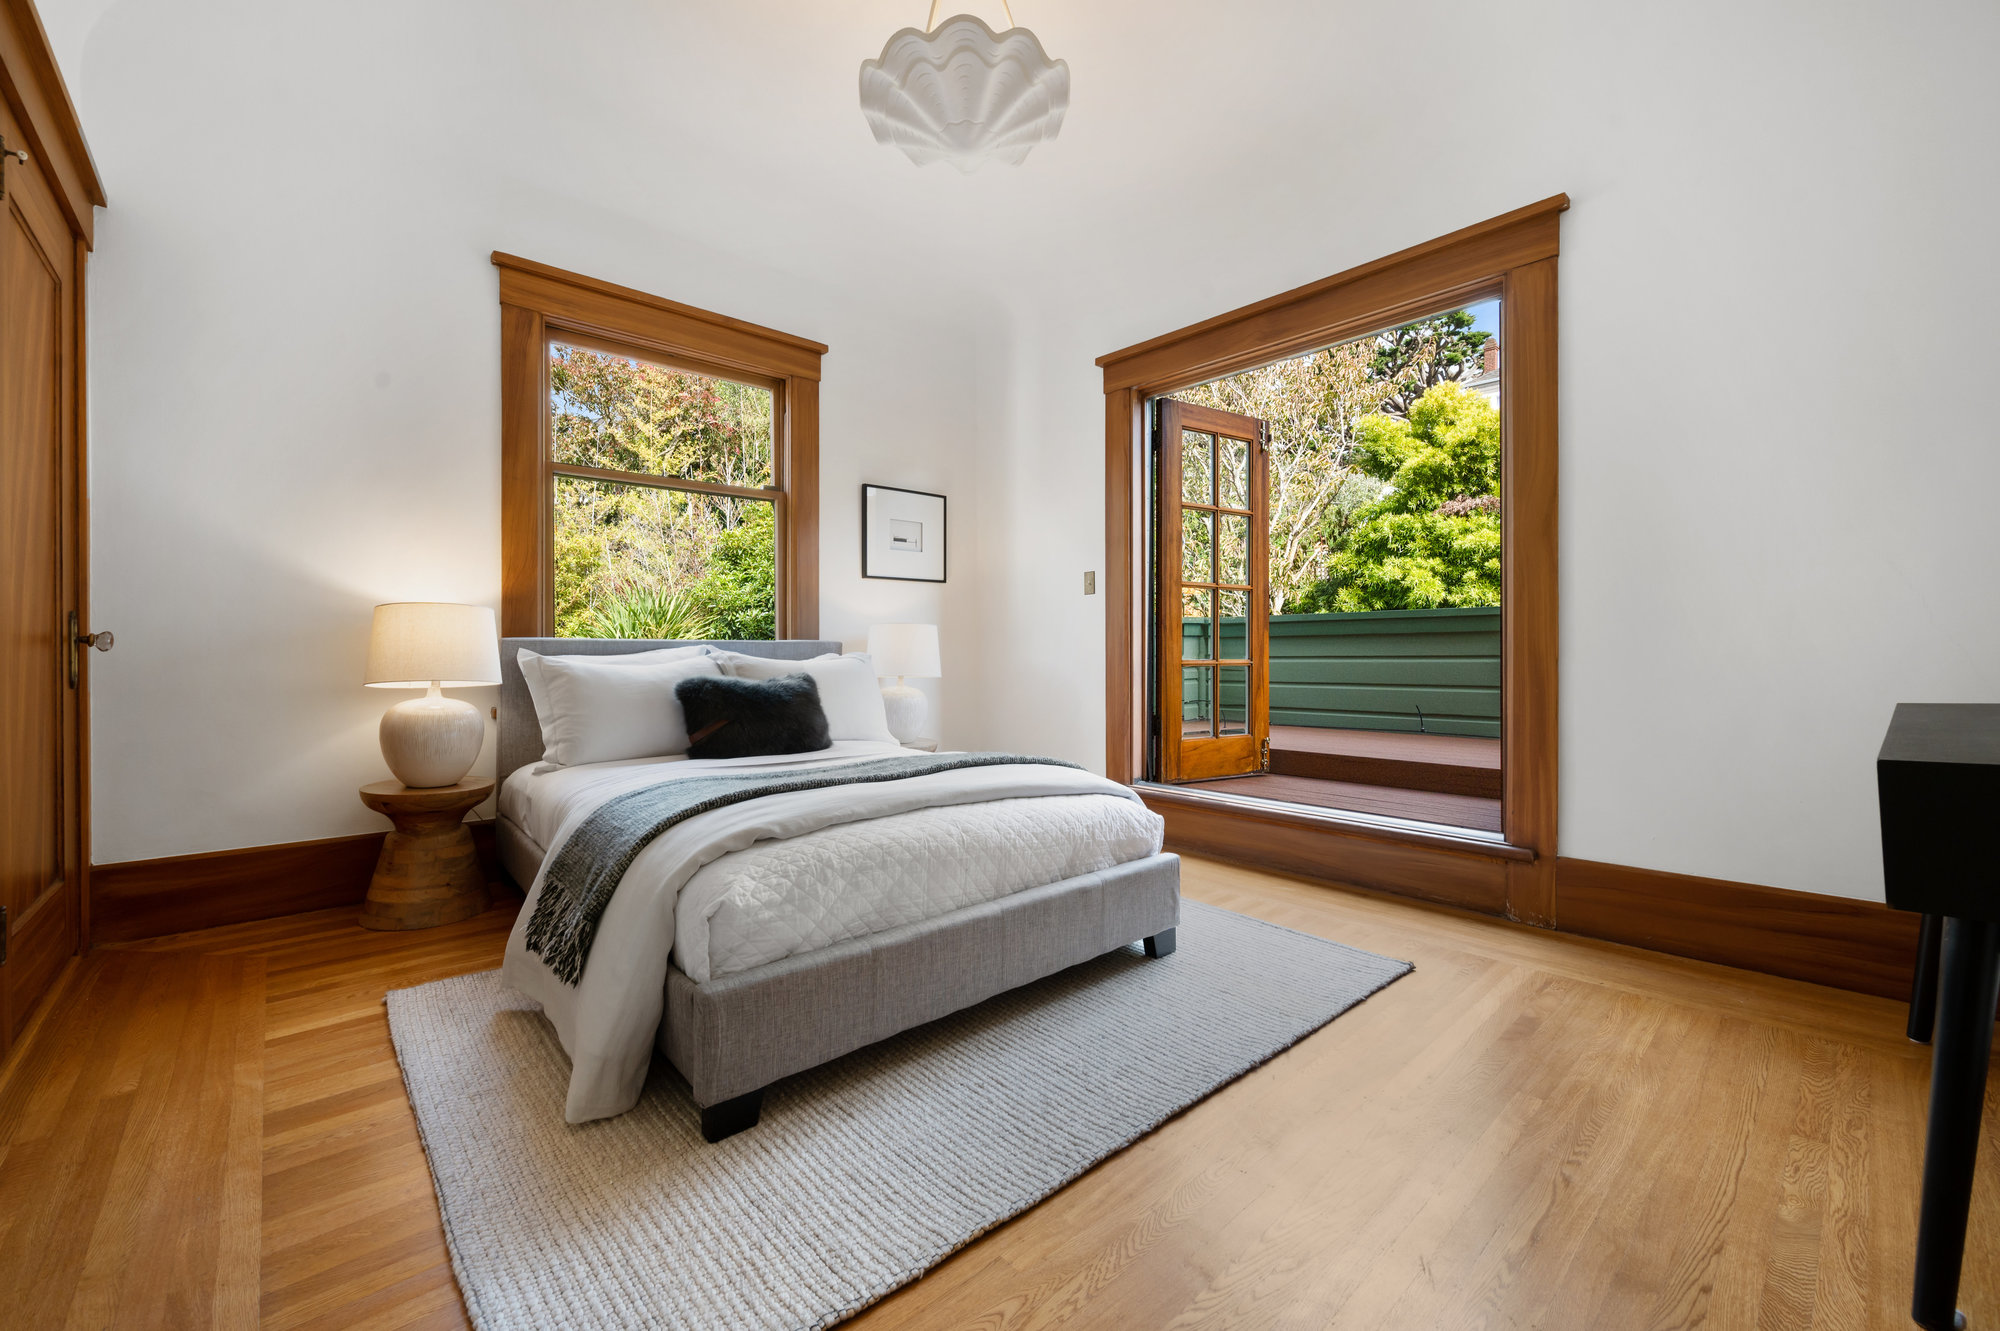 Property Photo: Second bedroom with wood floors and French doors opening to a private balcony